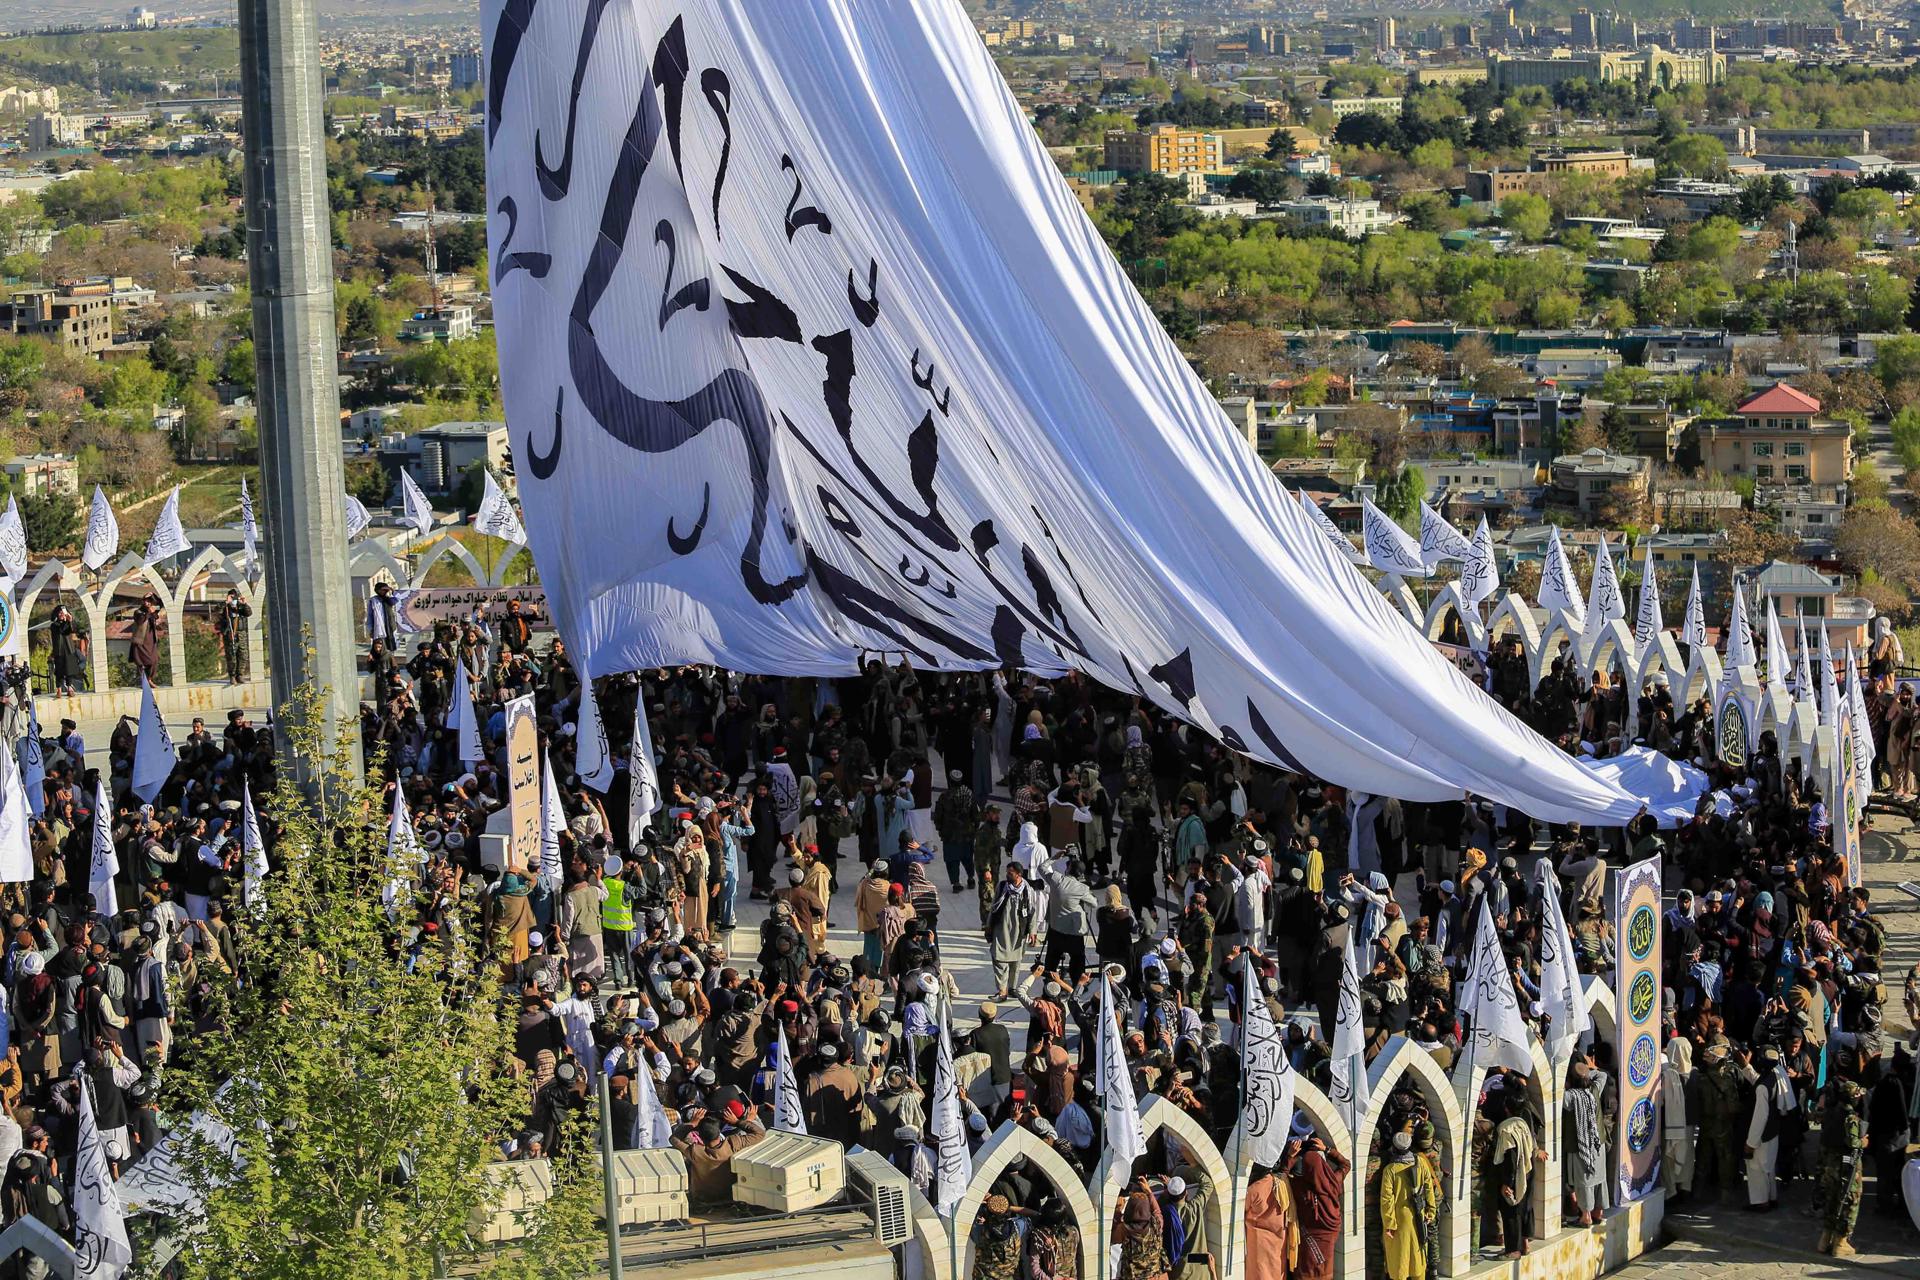 Taliban attend a ceremony to hoist largest flag and emblem of the Islamic Emirate of Afghanistan, in Kabul, Afghanistan, 31 March 2022. EFE/EPA/FILE/STRINGER